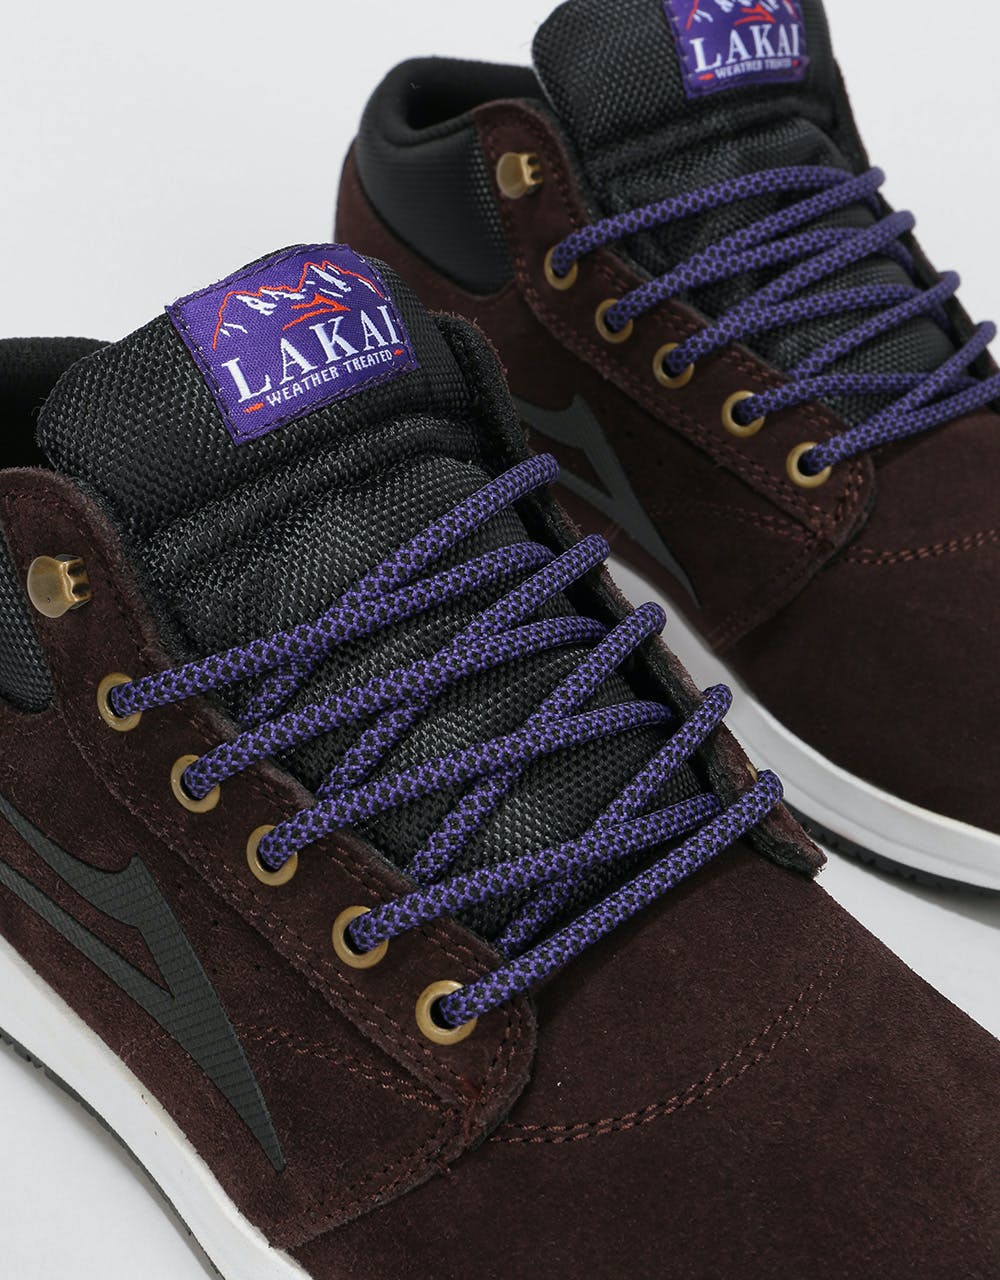 Lakai Griffin Mid Skate Shoes - Chocolate Suede